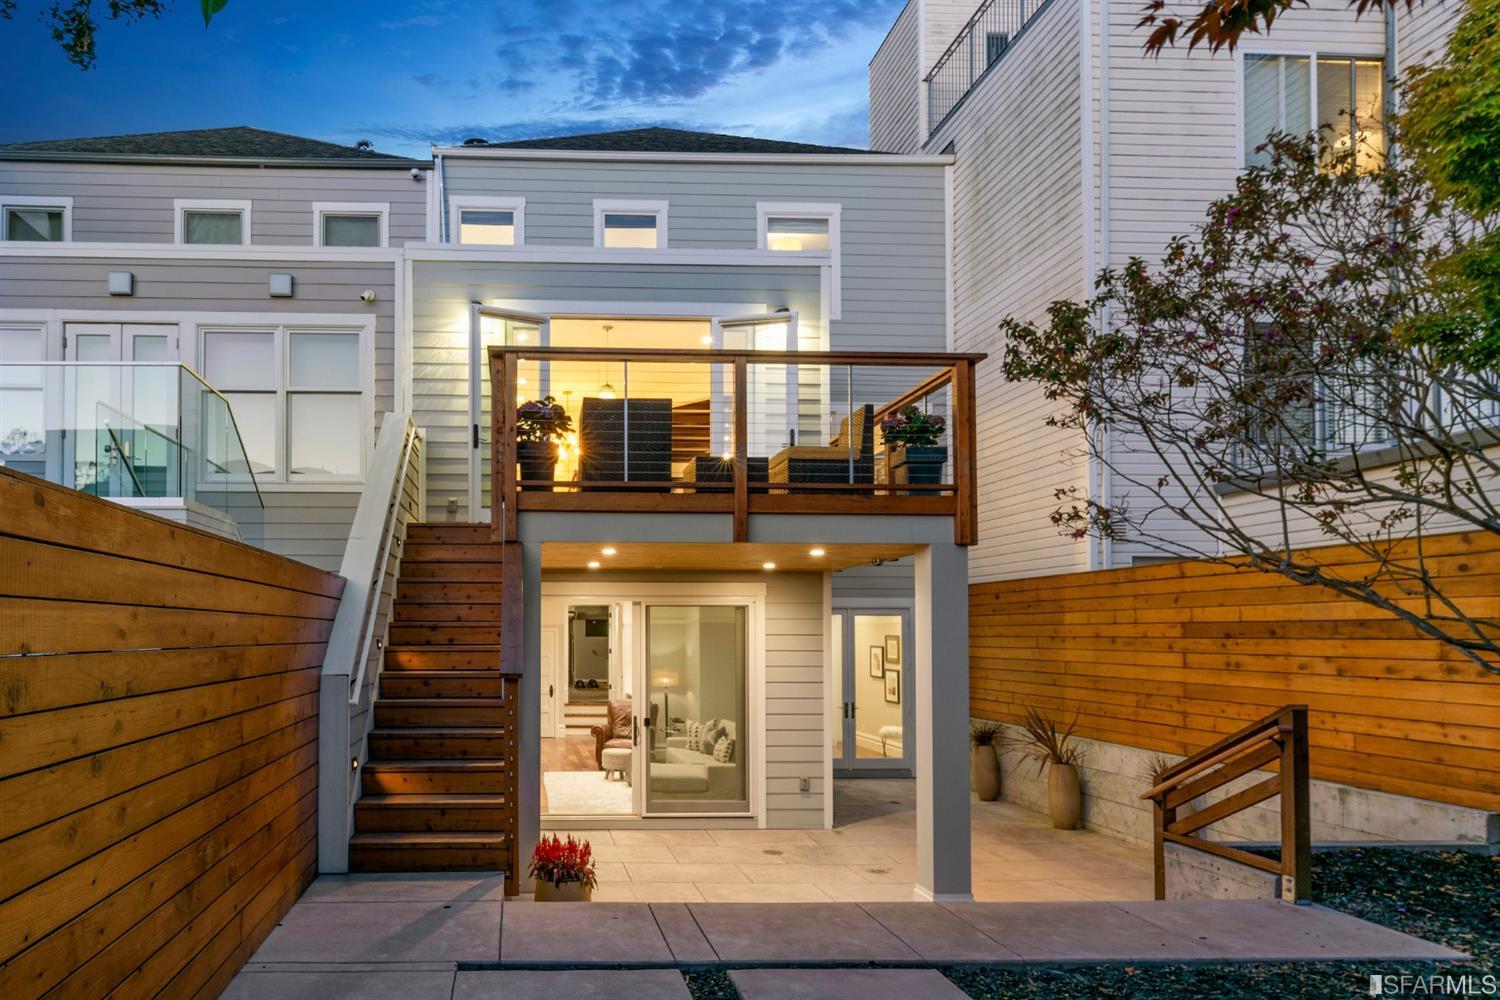 Property Photo: Twilight rear view of 1235 5th Ave, showing two levels of outdoor living